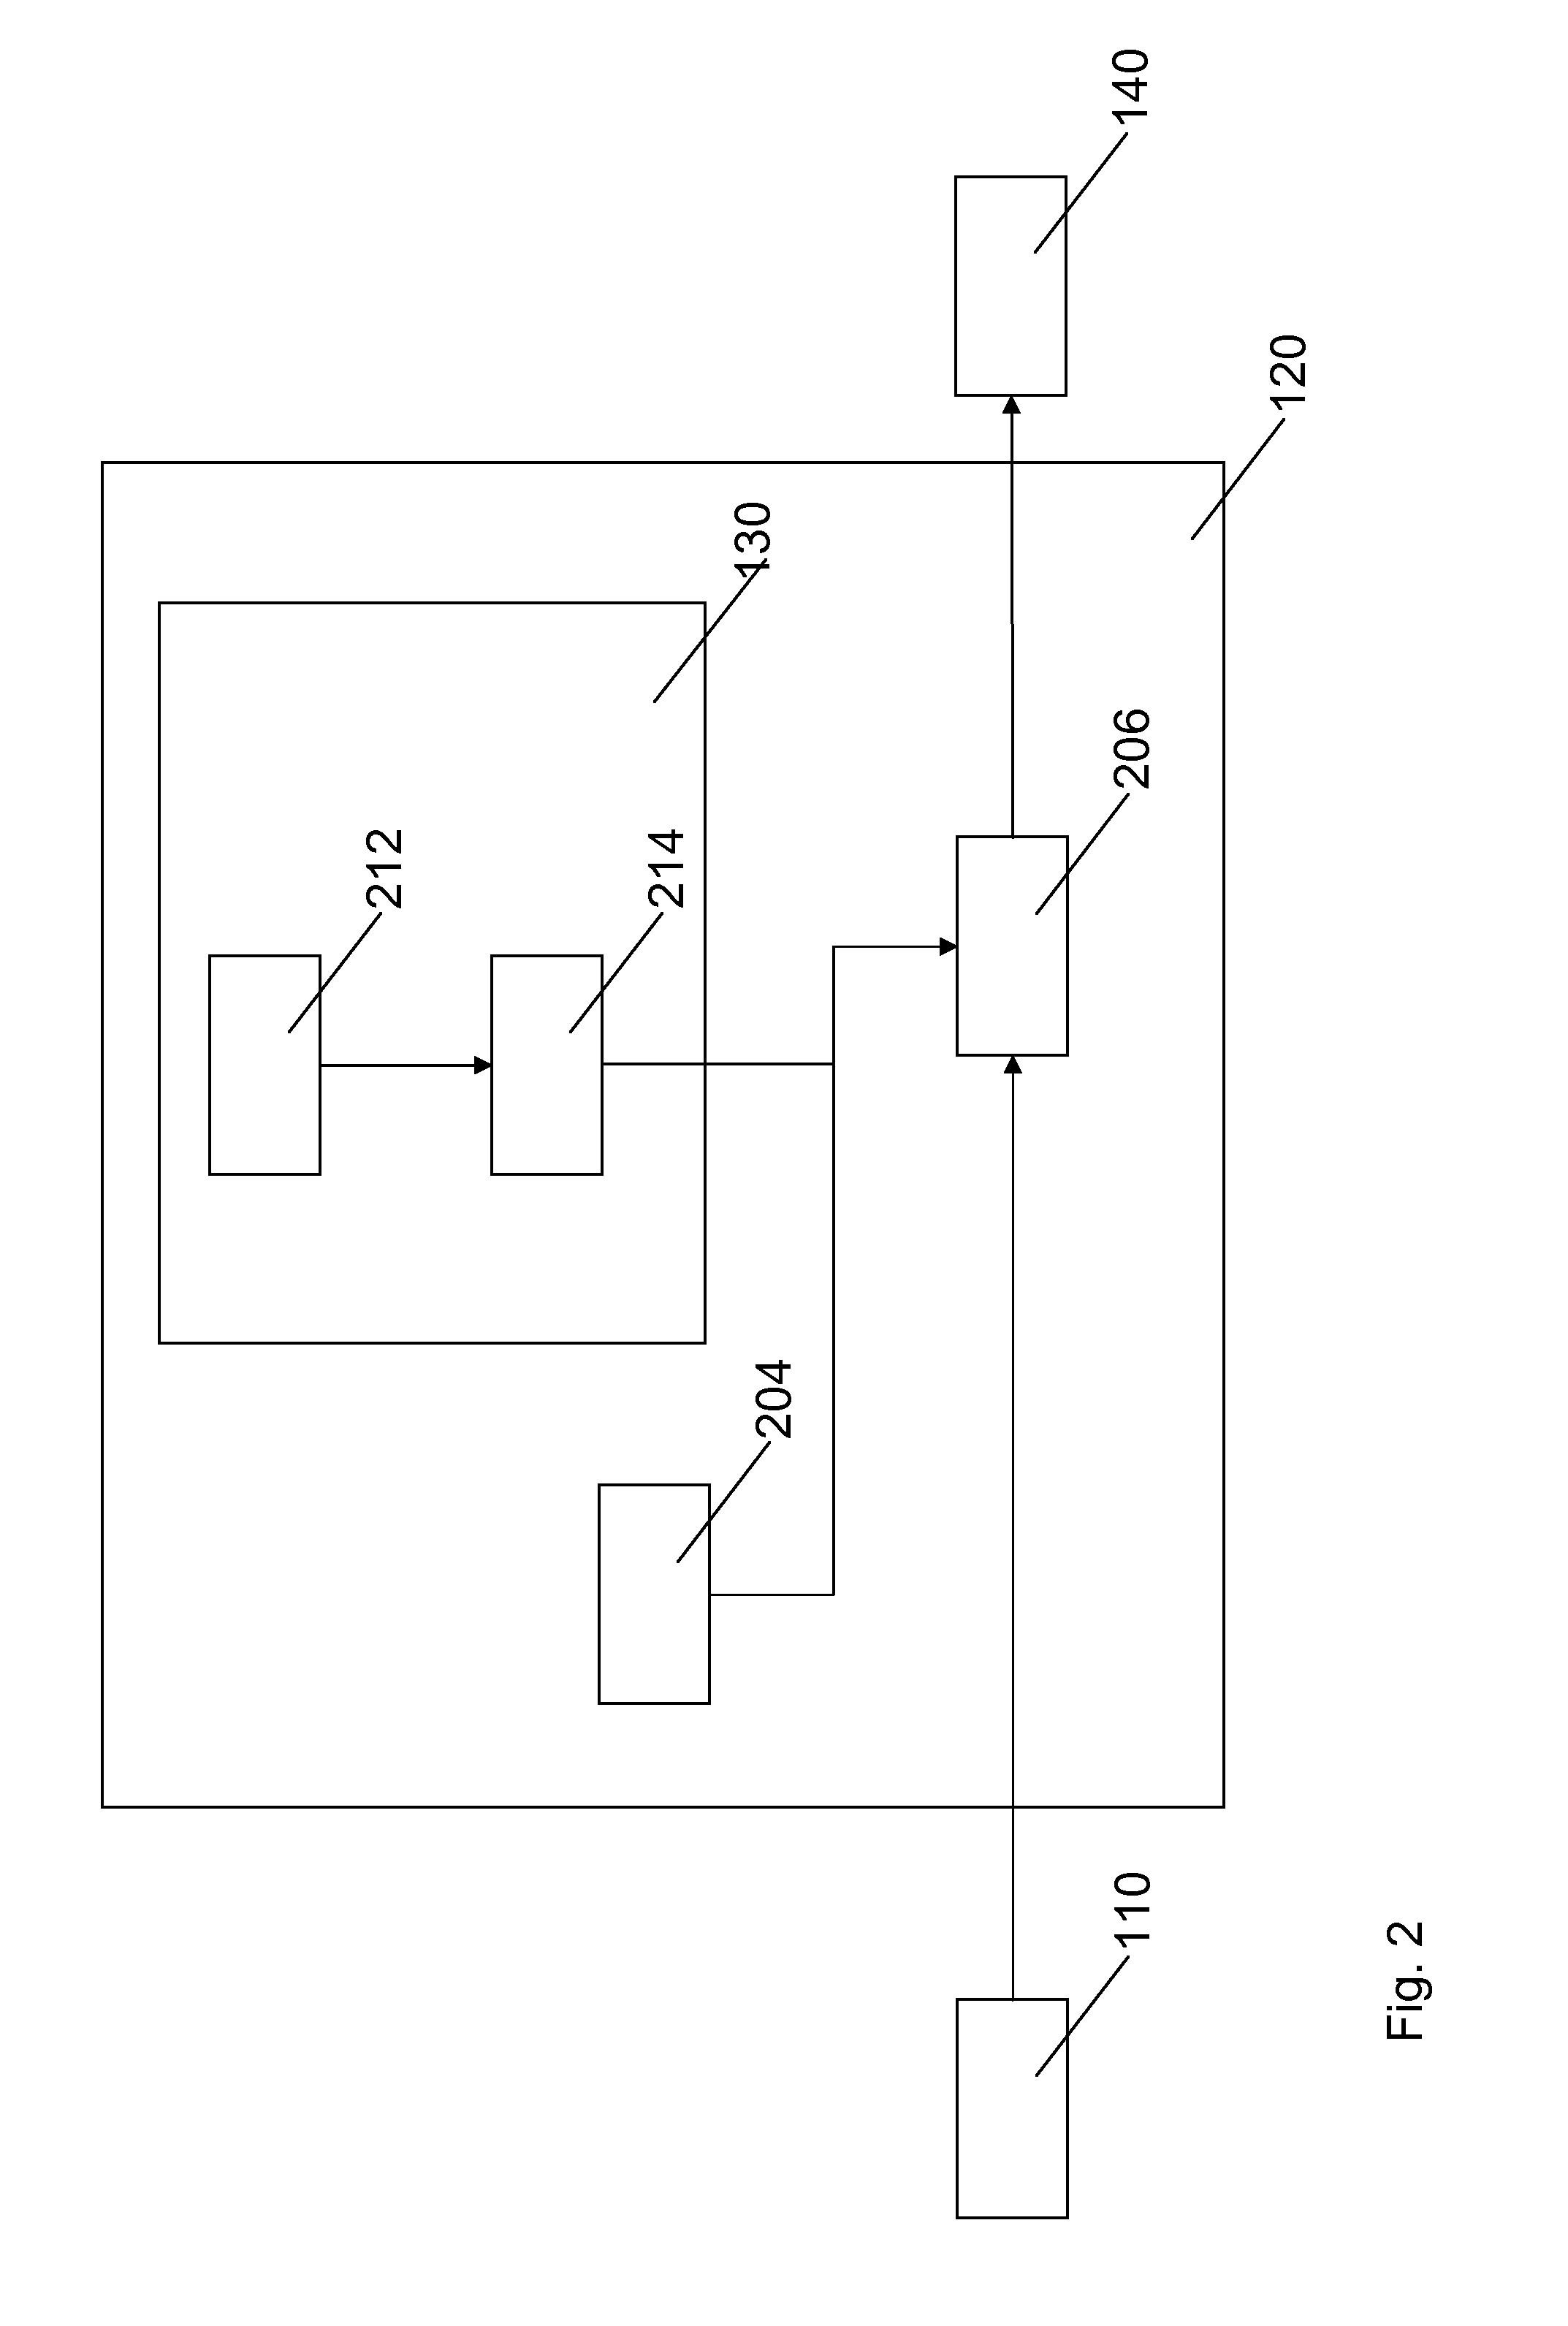 System for establishing a cryptographic key depending on a physical system